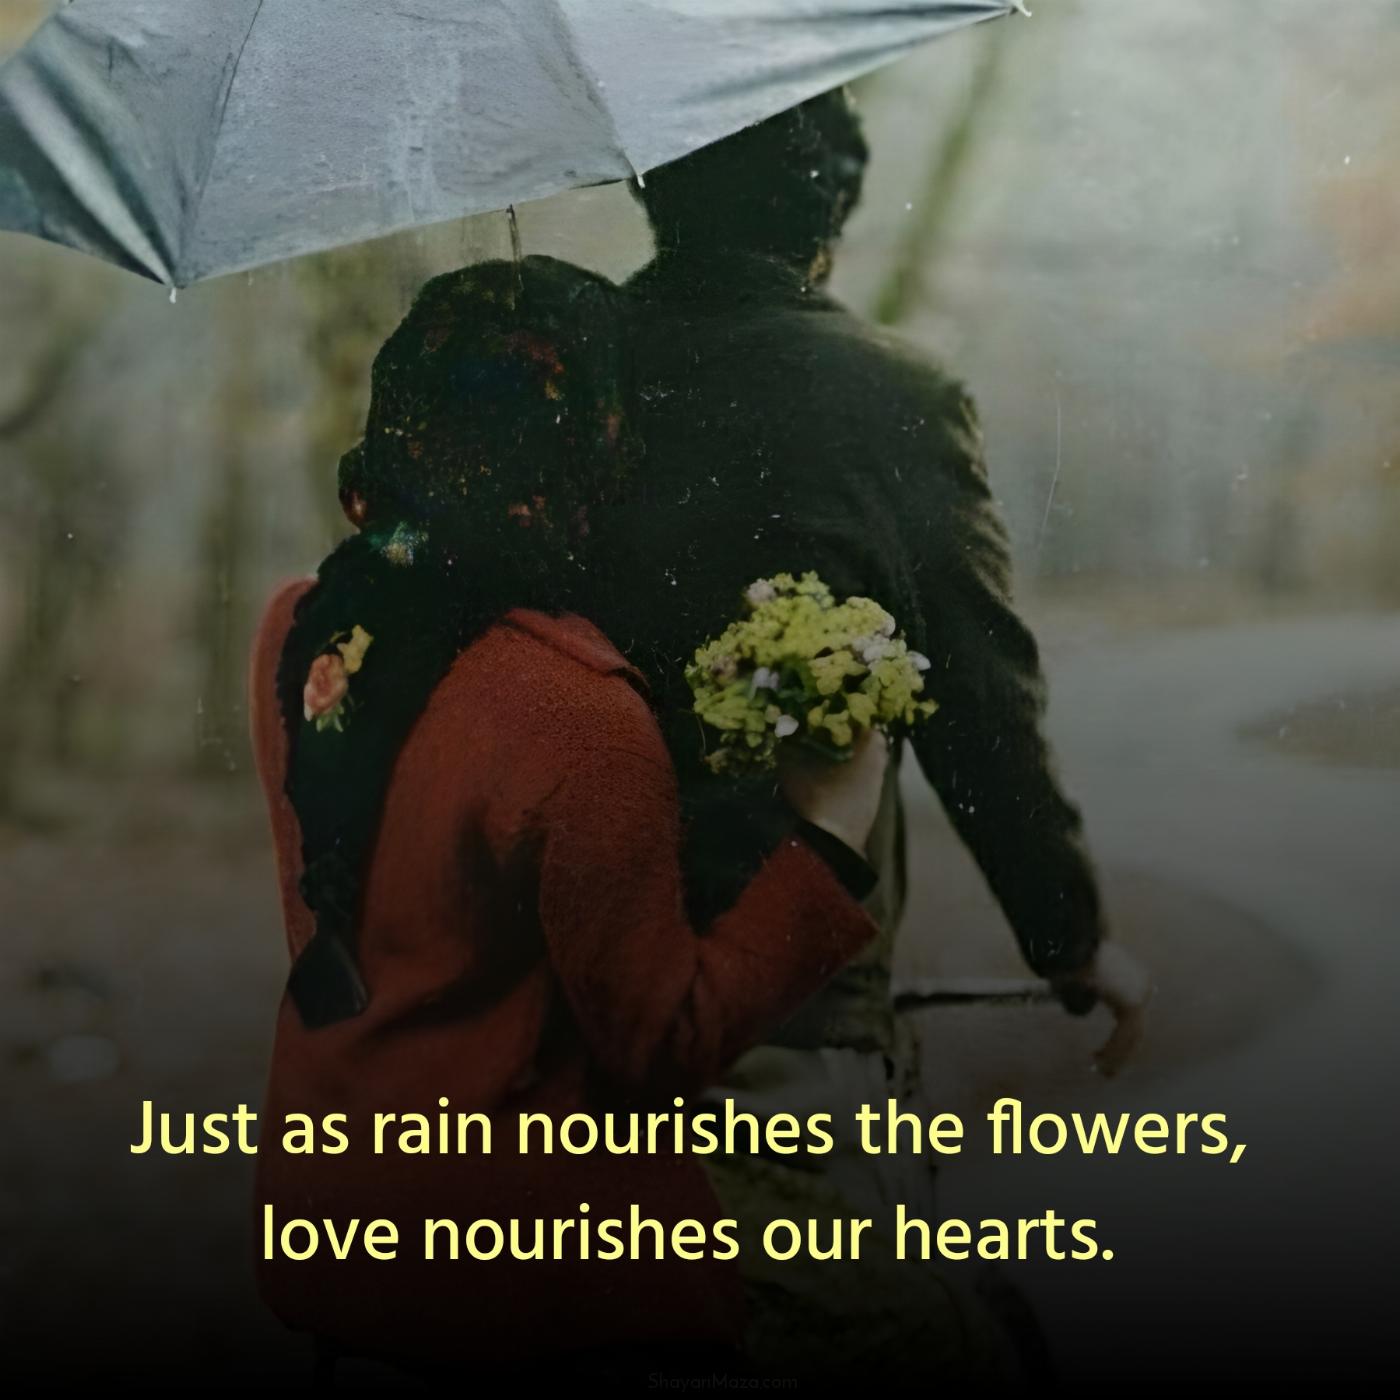 Just as rain nourishes the flowers love nourishes our hearts